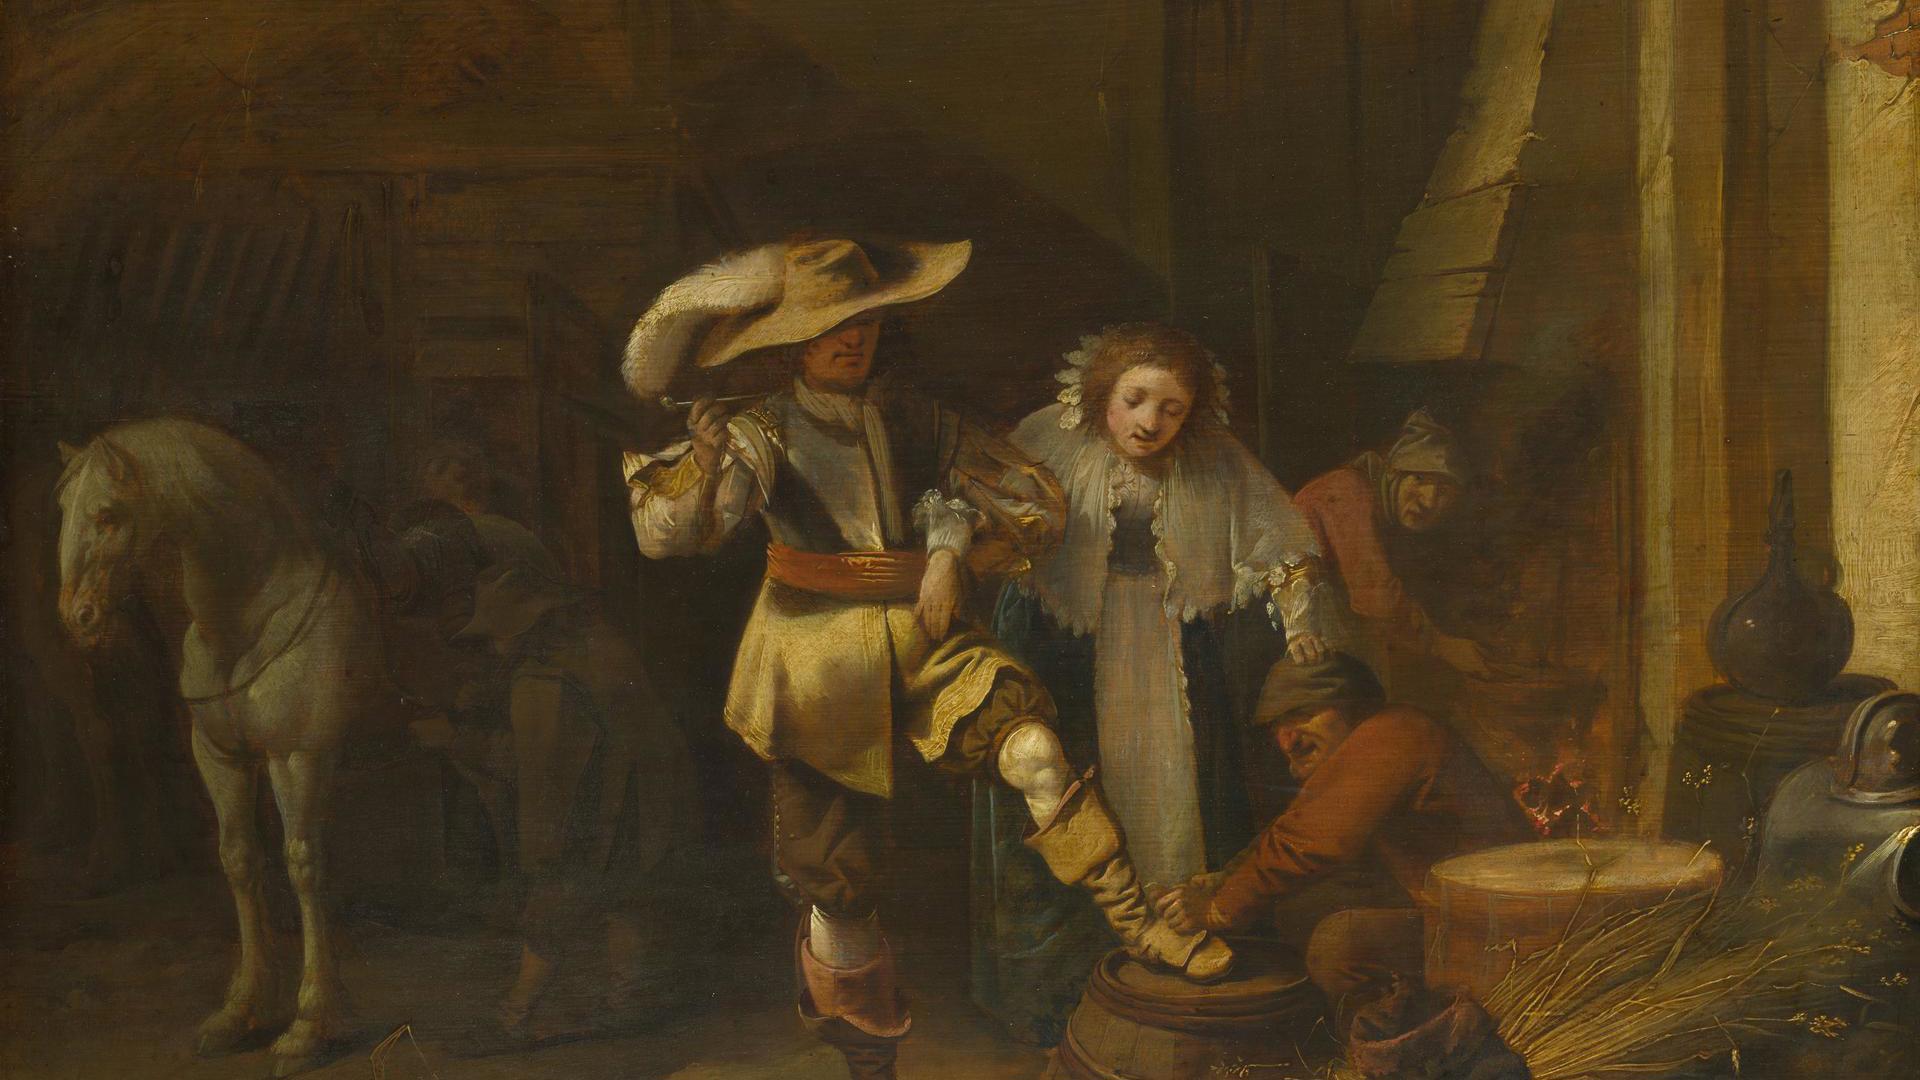 A Man and a Woman in a Stableyard by Pieter Quast